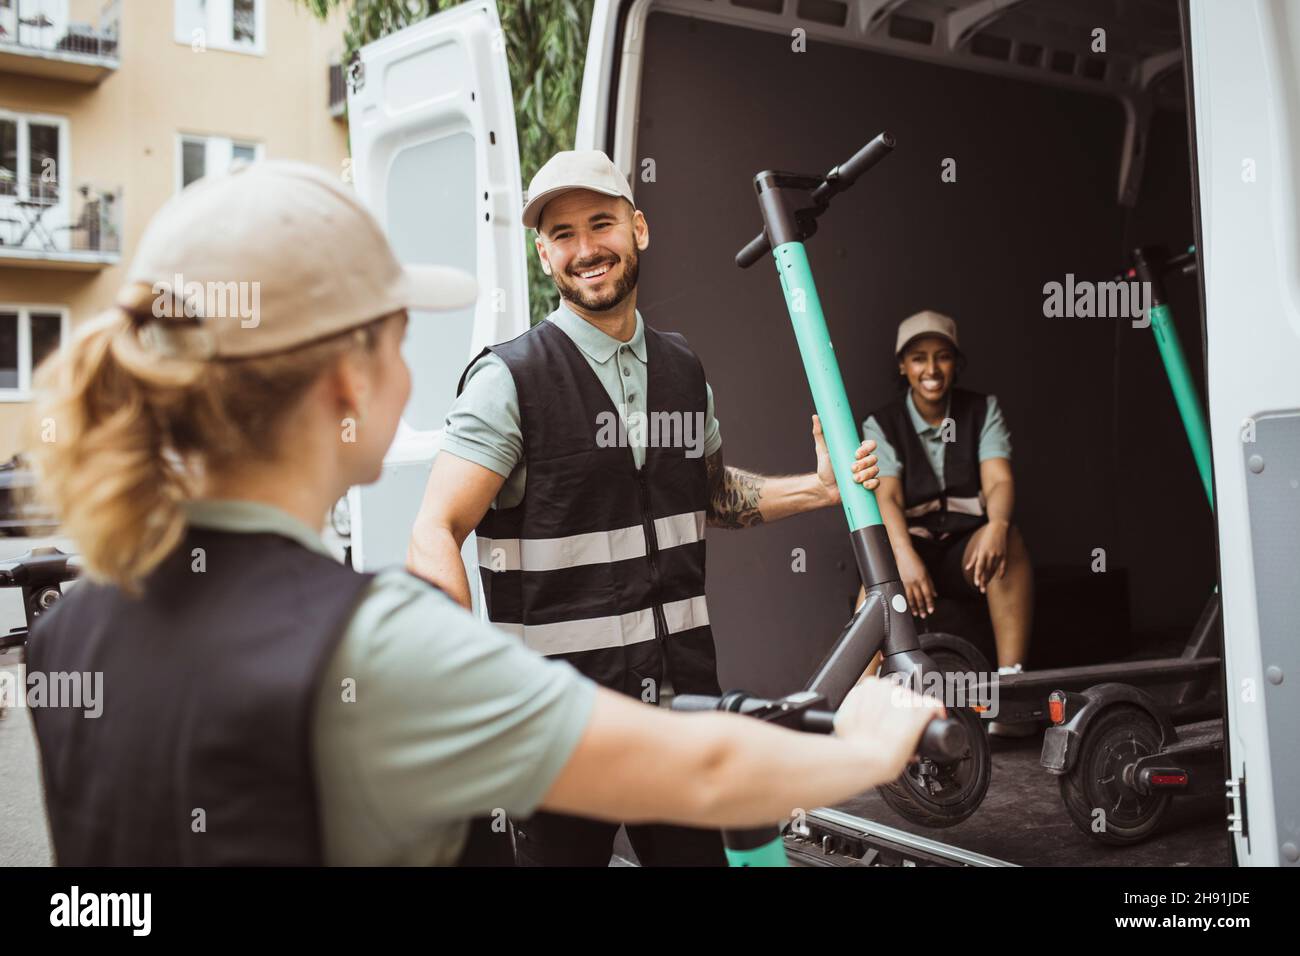 Smiling male worker talking with female coworker while loading push scooter in delivery van Stock Photo